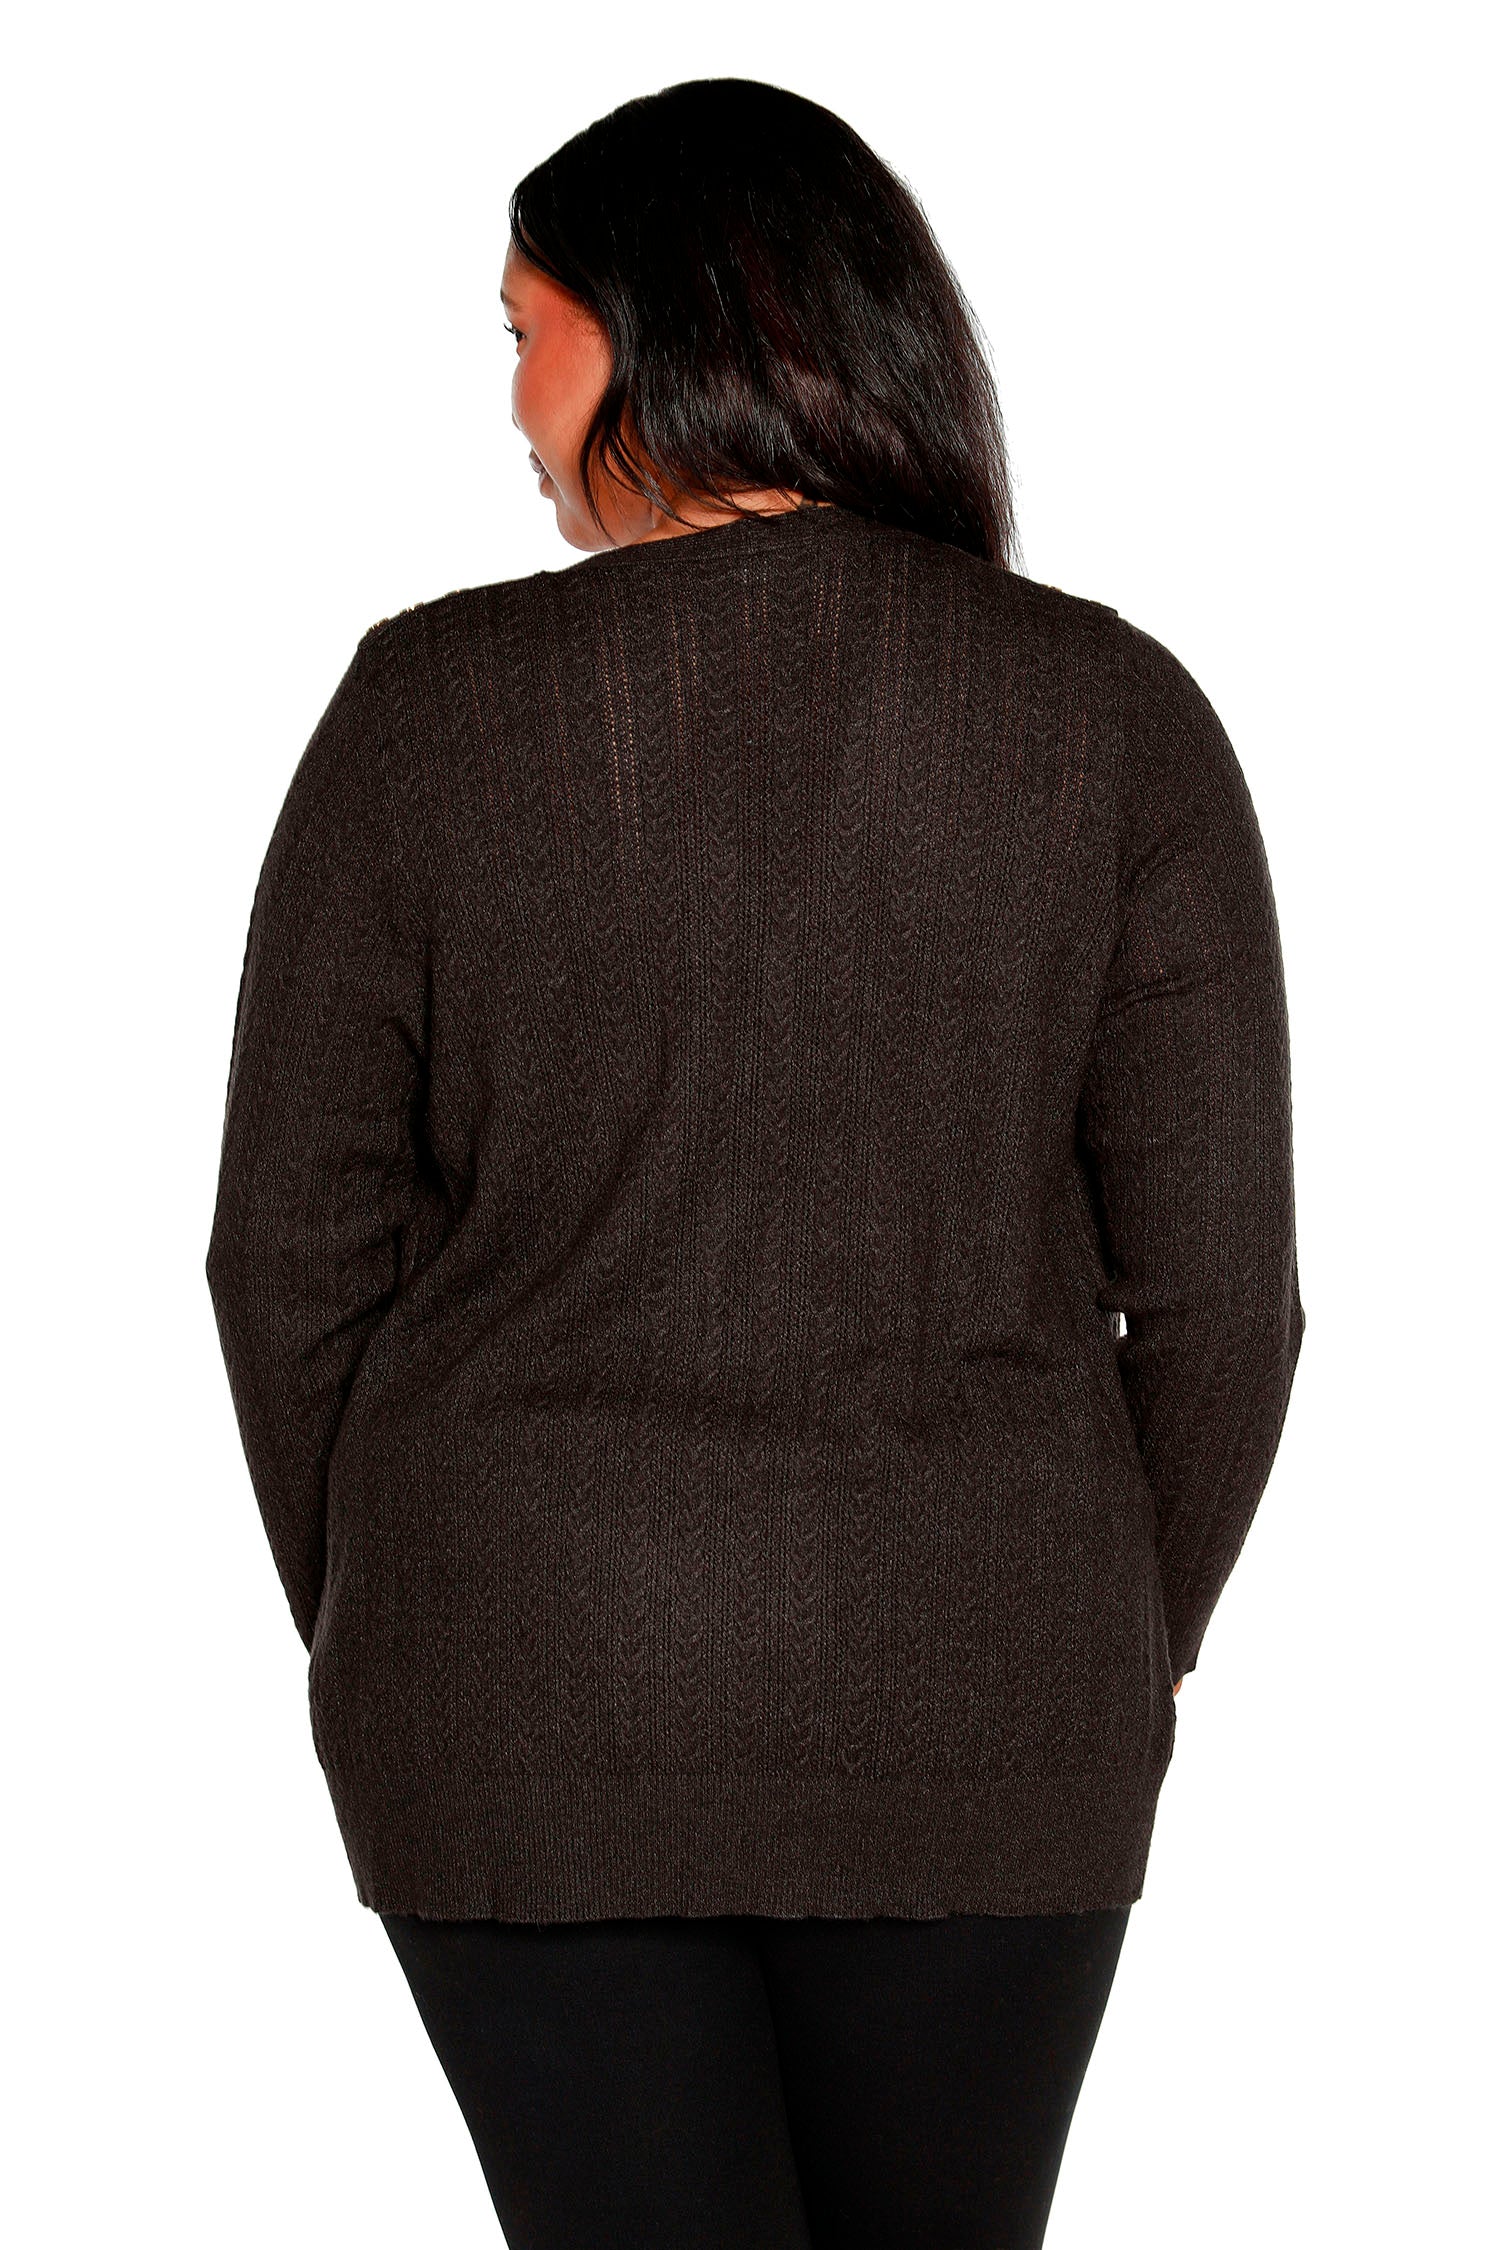 Women's Open Front Pointelle Cardigan with Buttons at the Shoulders | Curvy